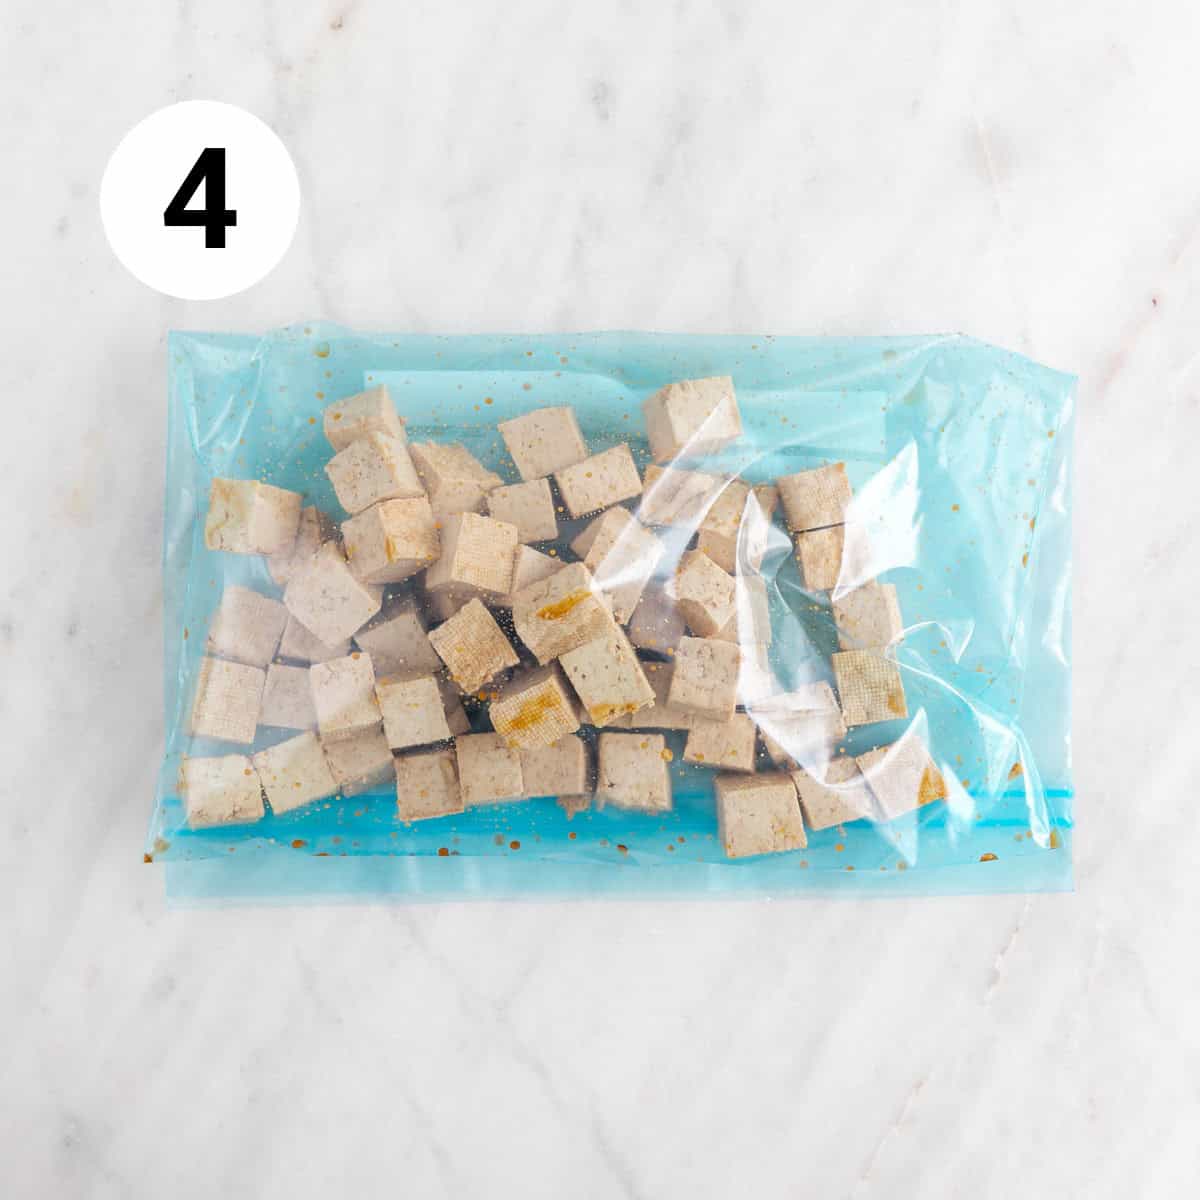 Tofu cubes with soy sauce in a large ziplock bag.